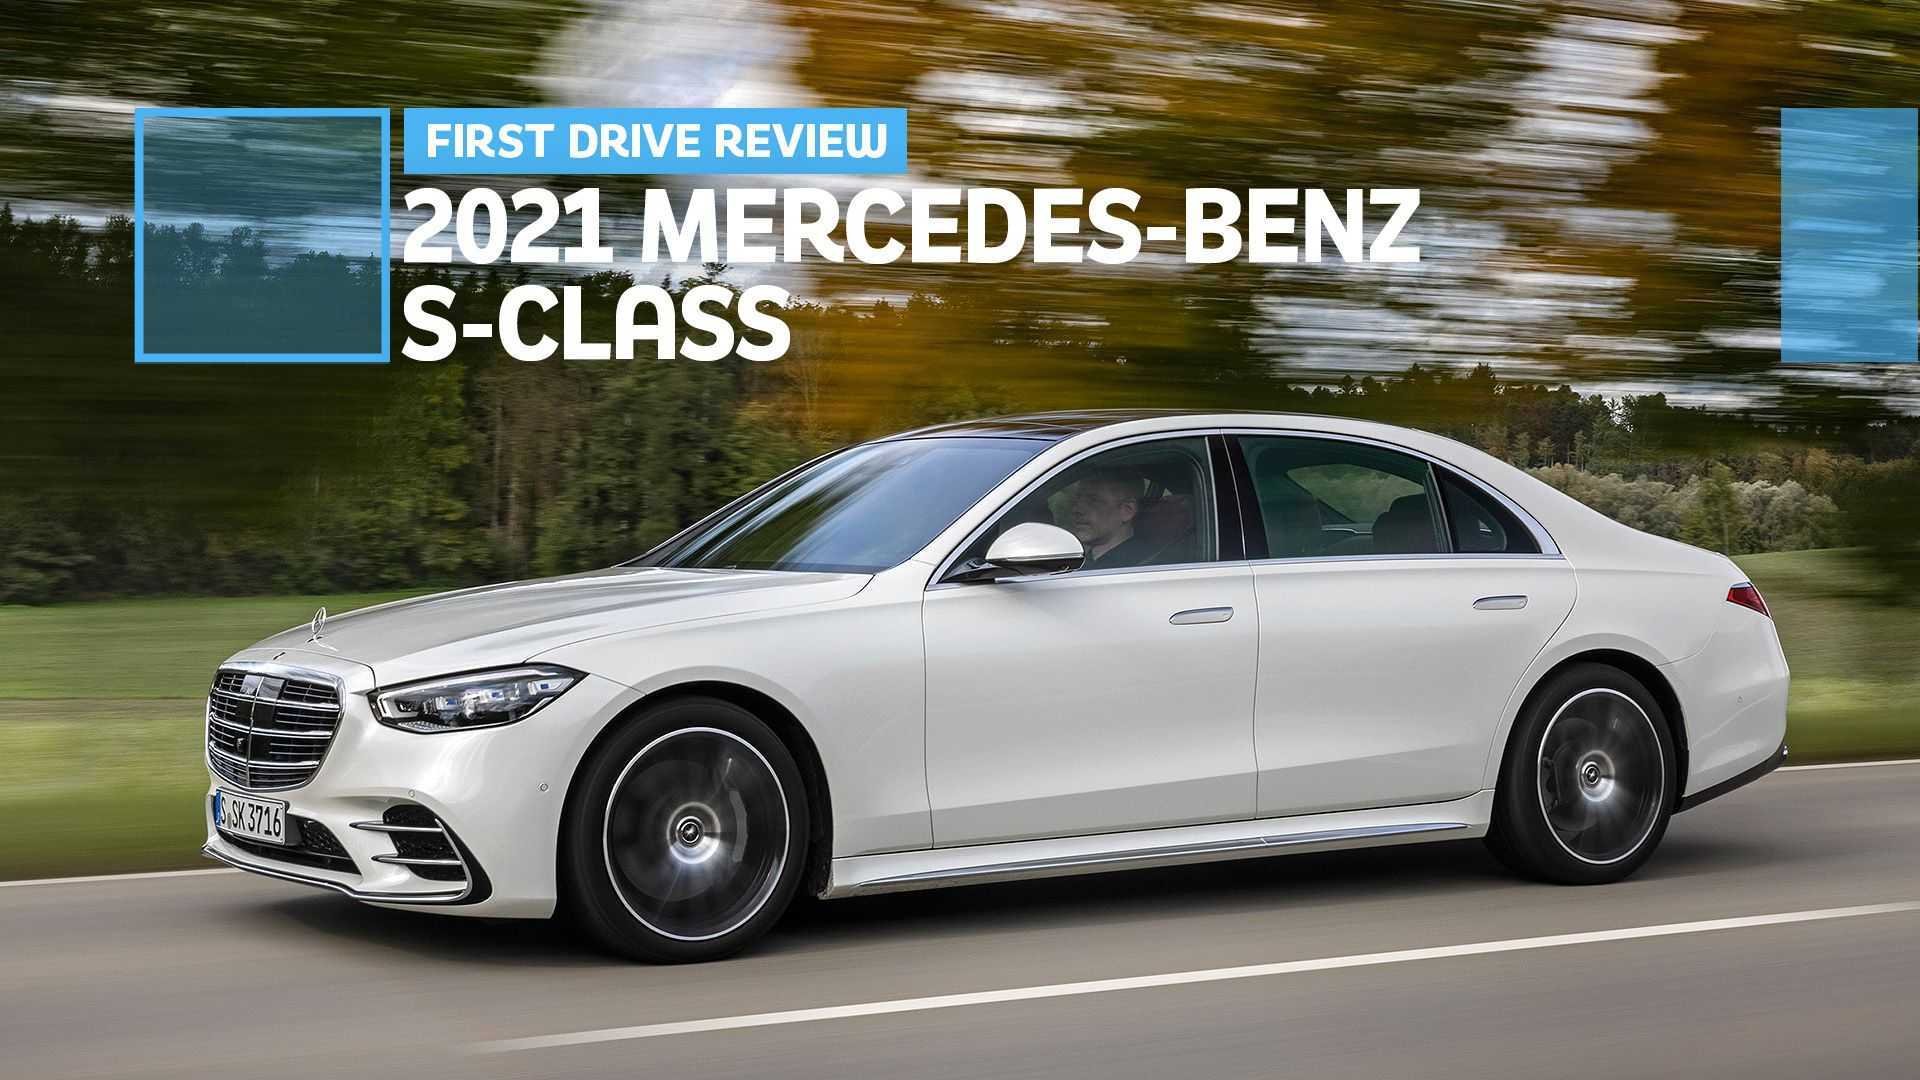 2021 Mercedes-Benz S-Class First Drive Review: The Future Is Here